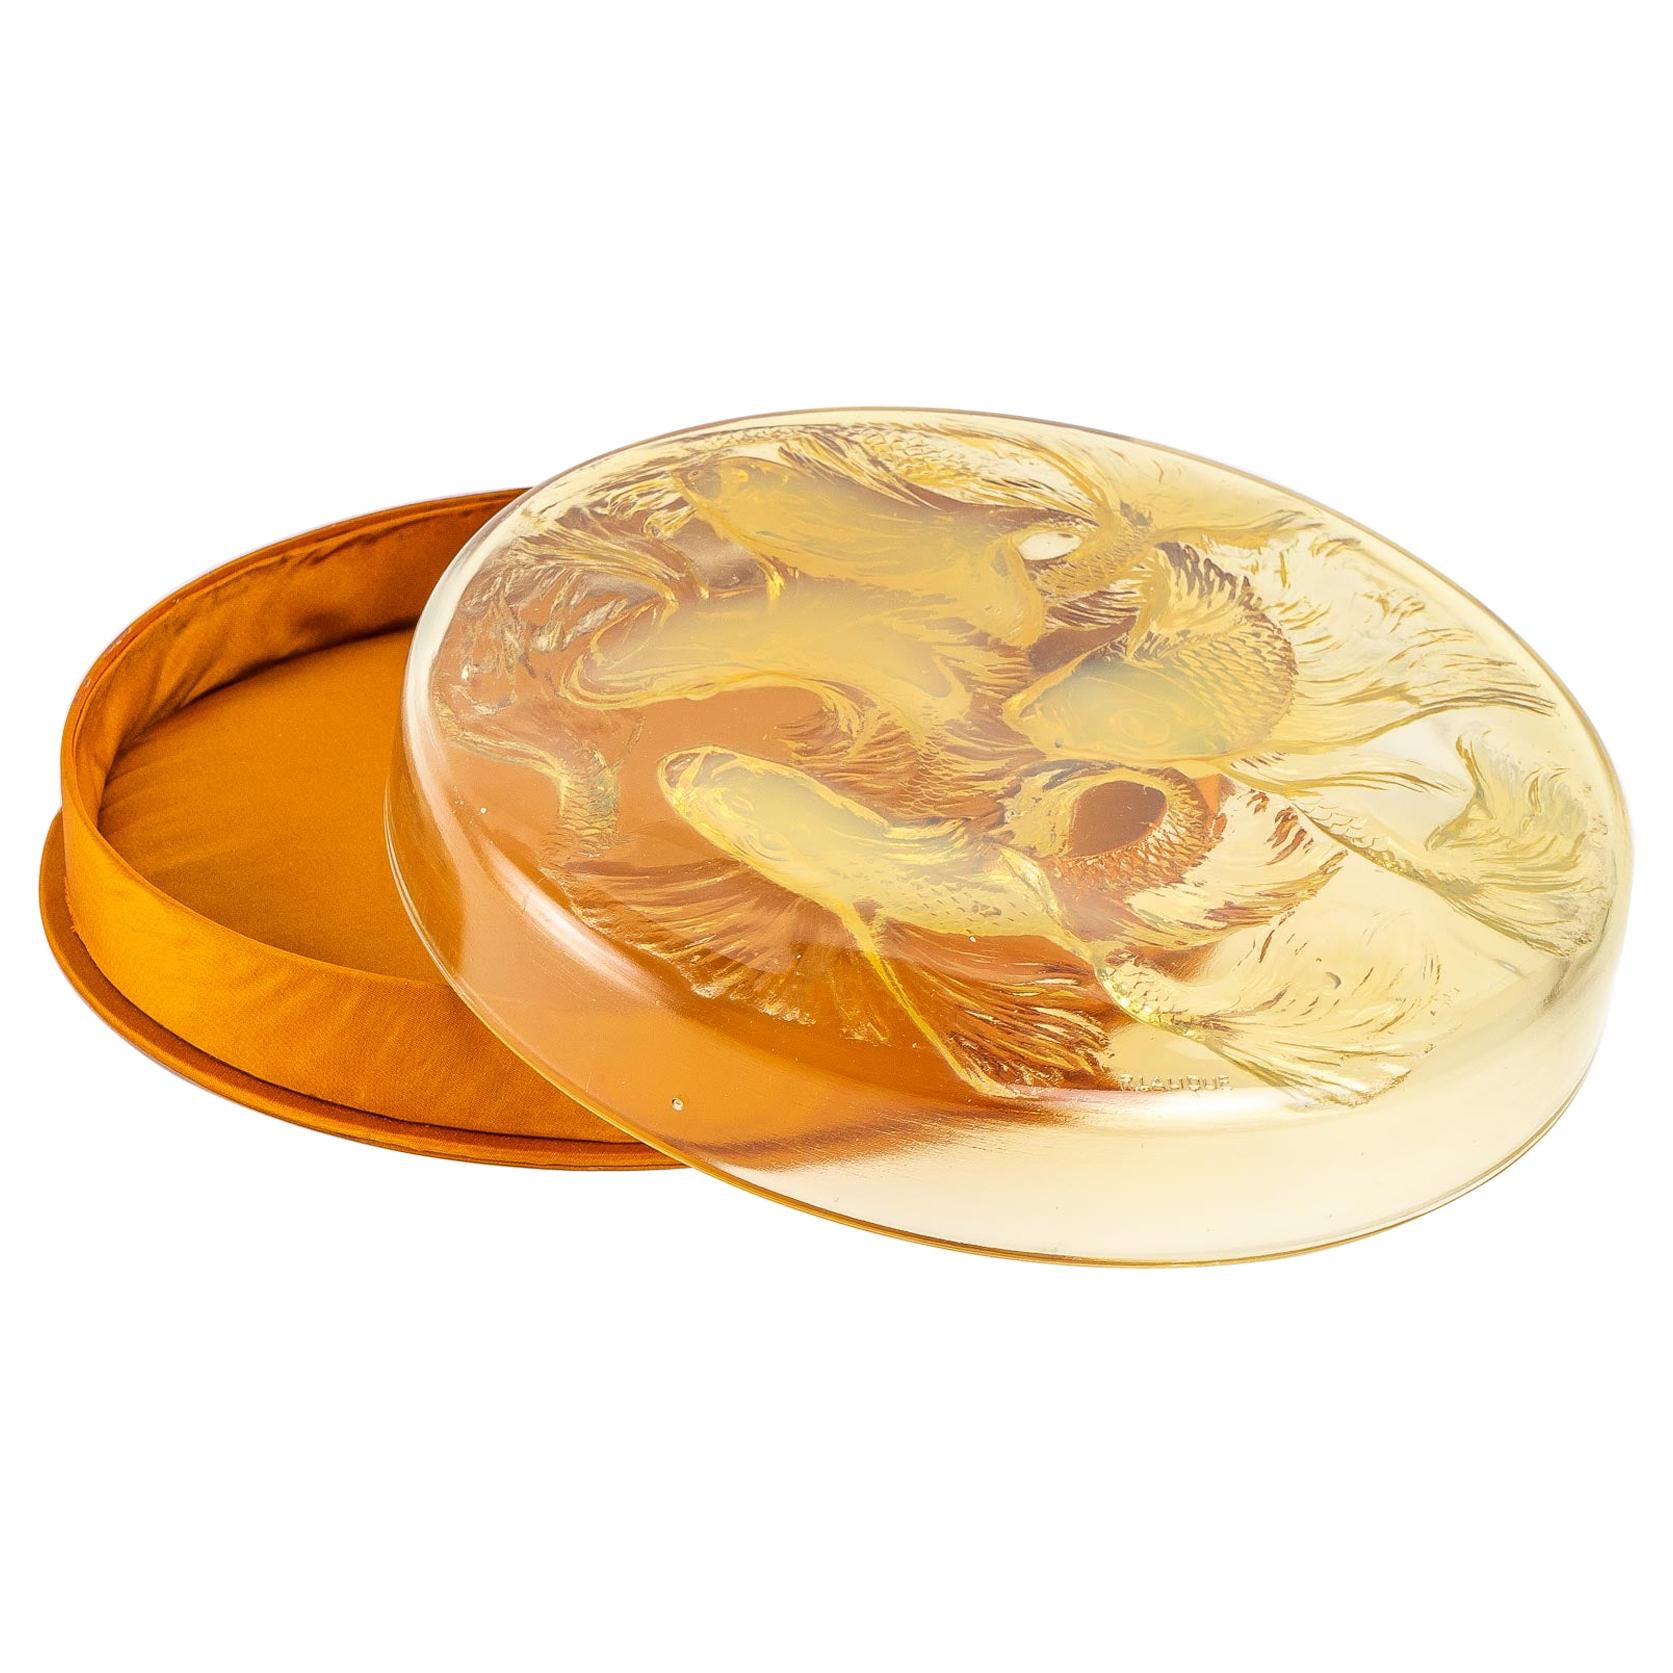 1921 Rene Lalique Cyprins Yellow Opalescent Box with Satin Base, Fishes